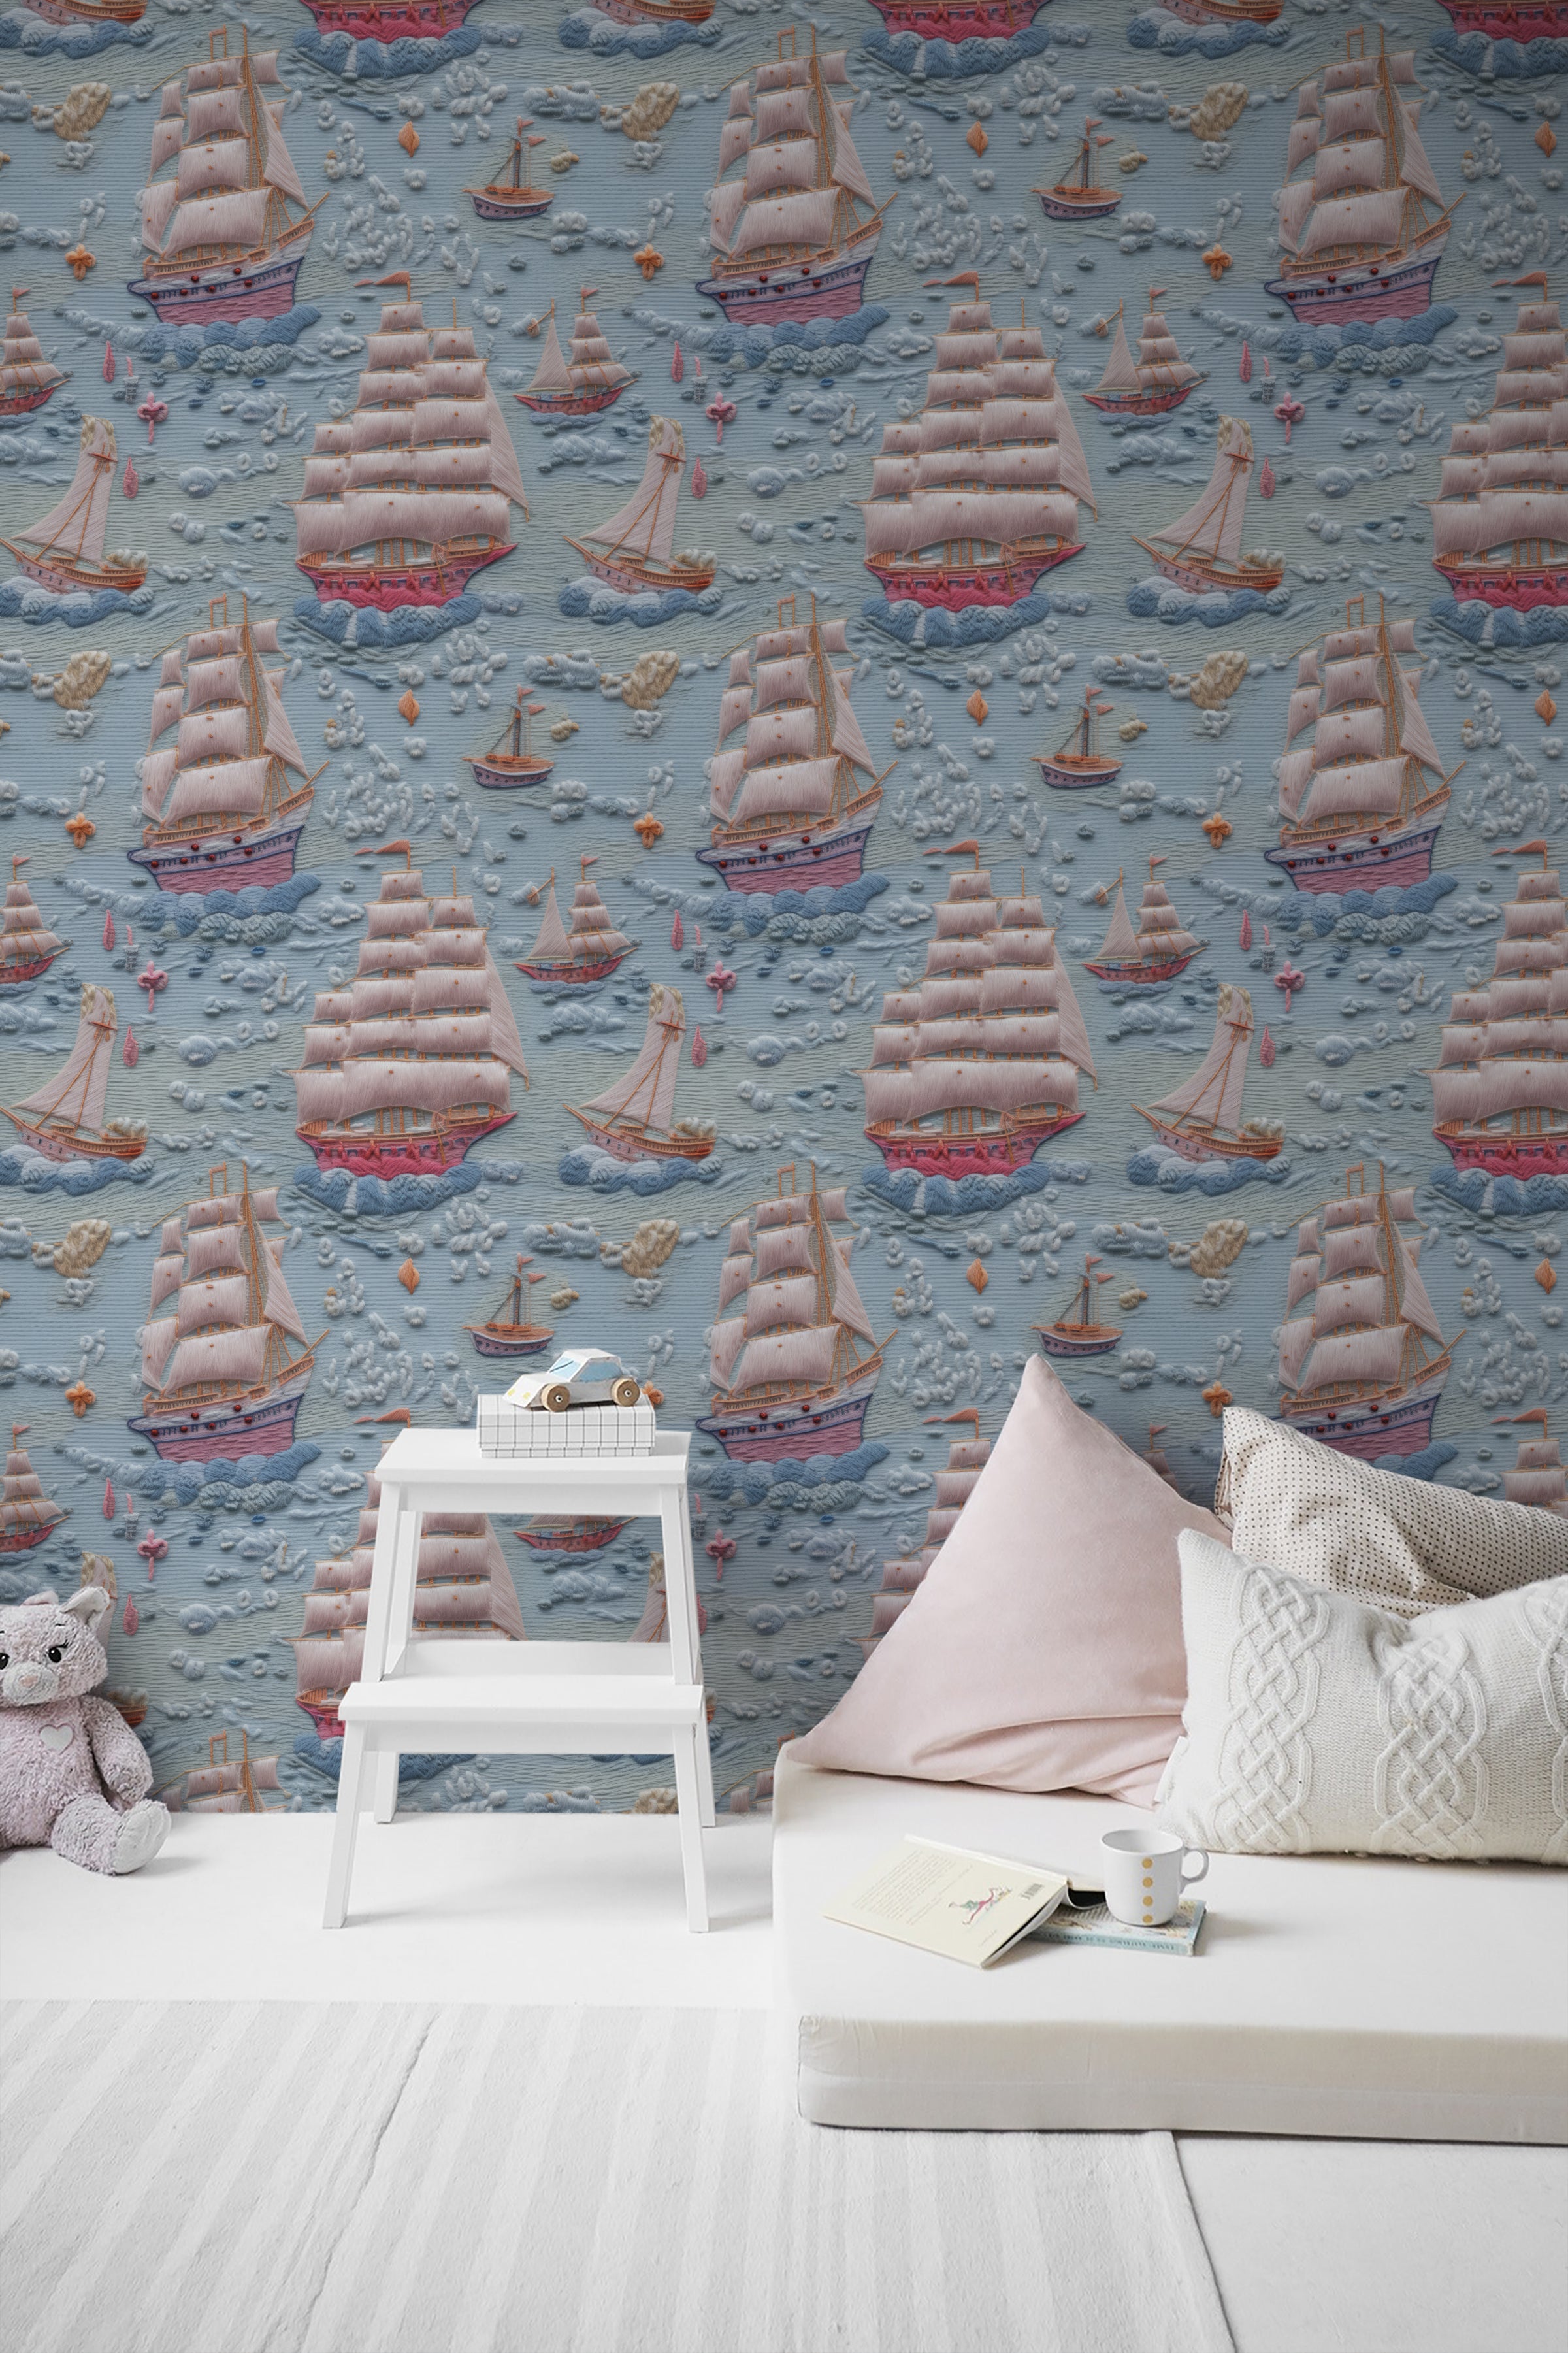 Children's room featuring Breezy Sail Wallpaper with a playful pattern of large sailboats on a textured blue background, styled with a white step stool and plush toys, creating a whimsical maritime theme.